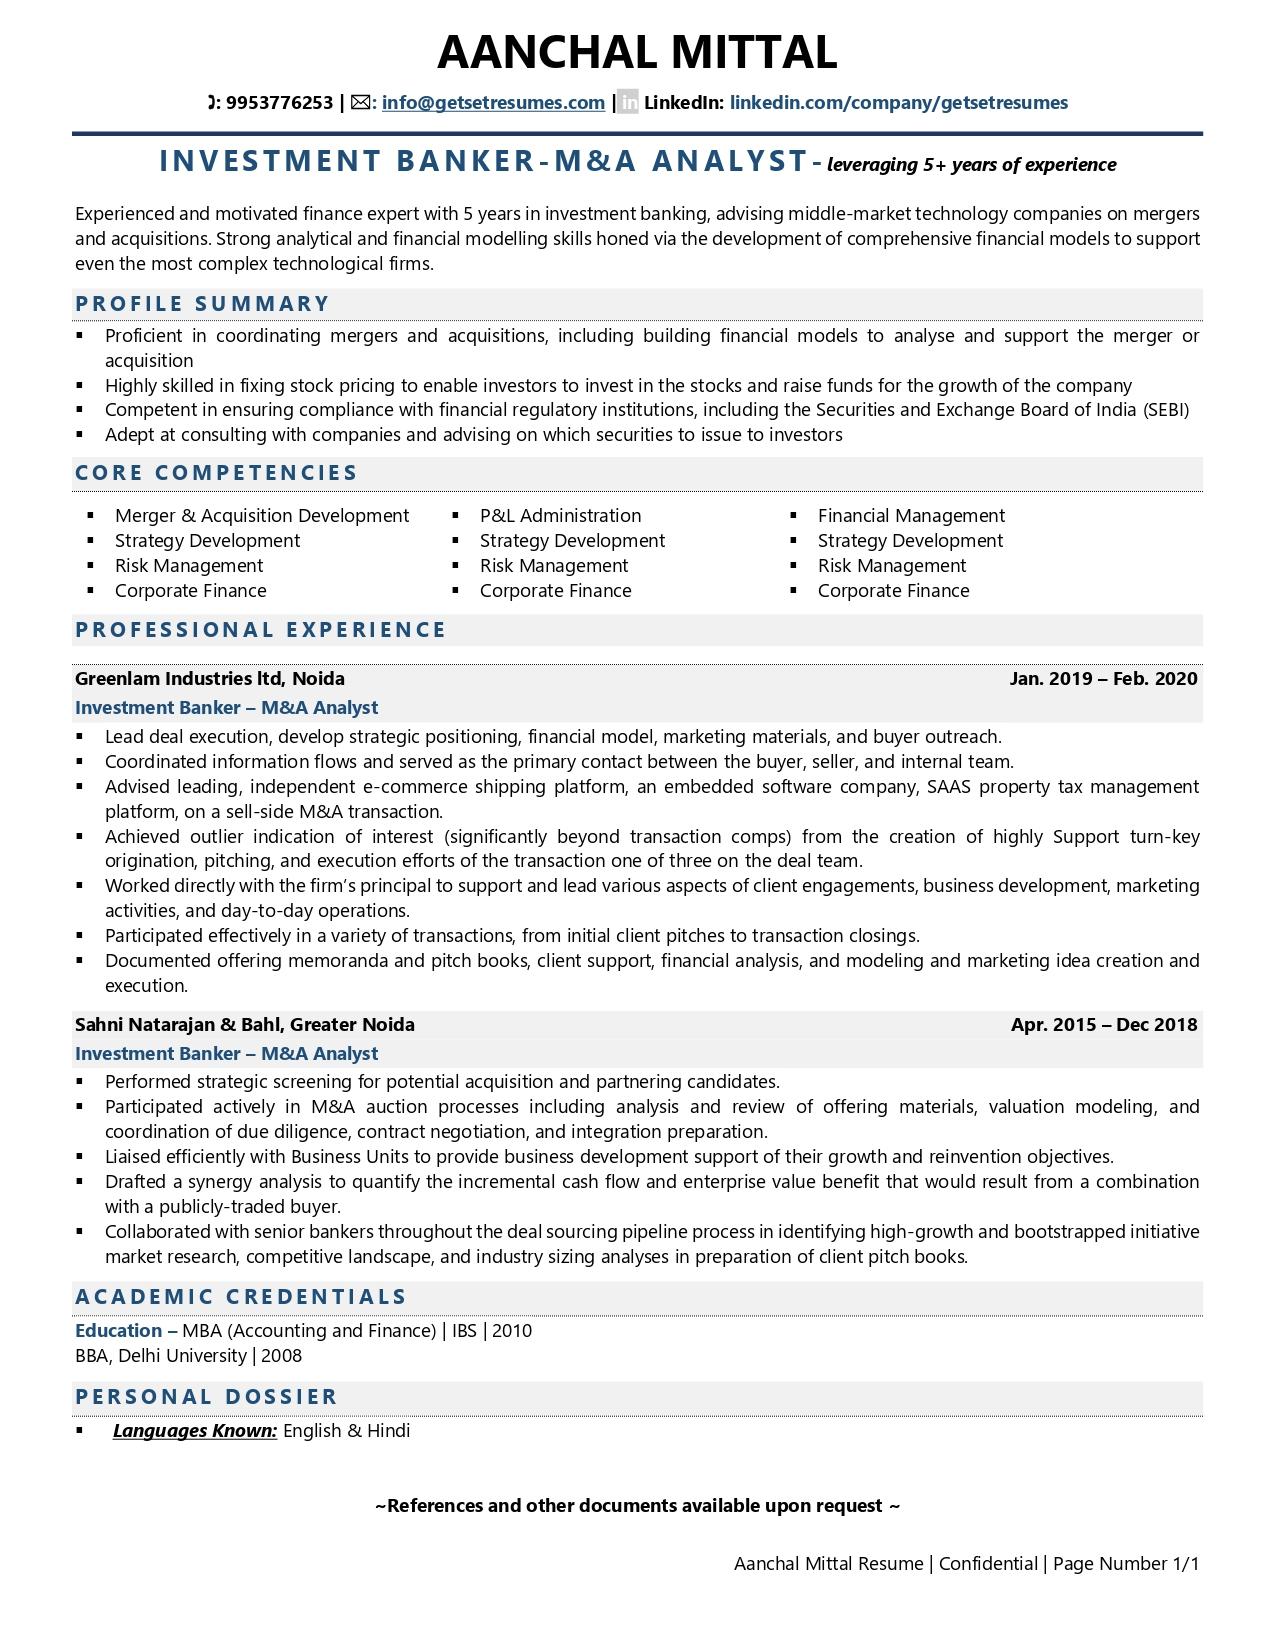 Investment Banker & M&A Analyst - Resume Example & Template